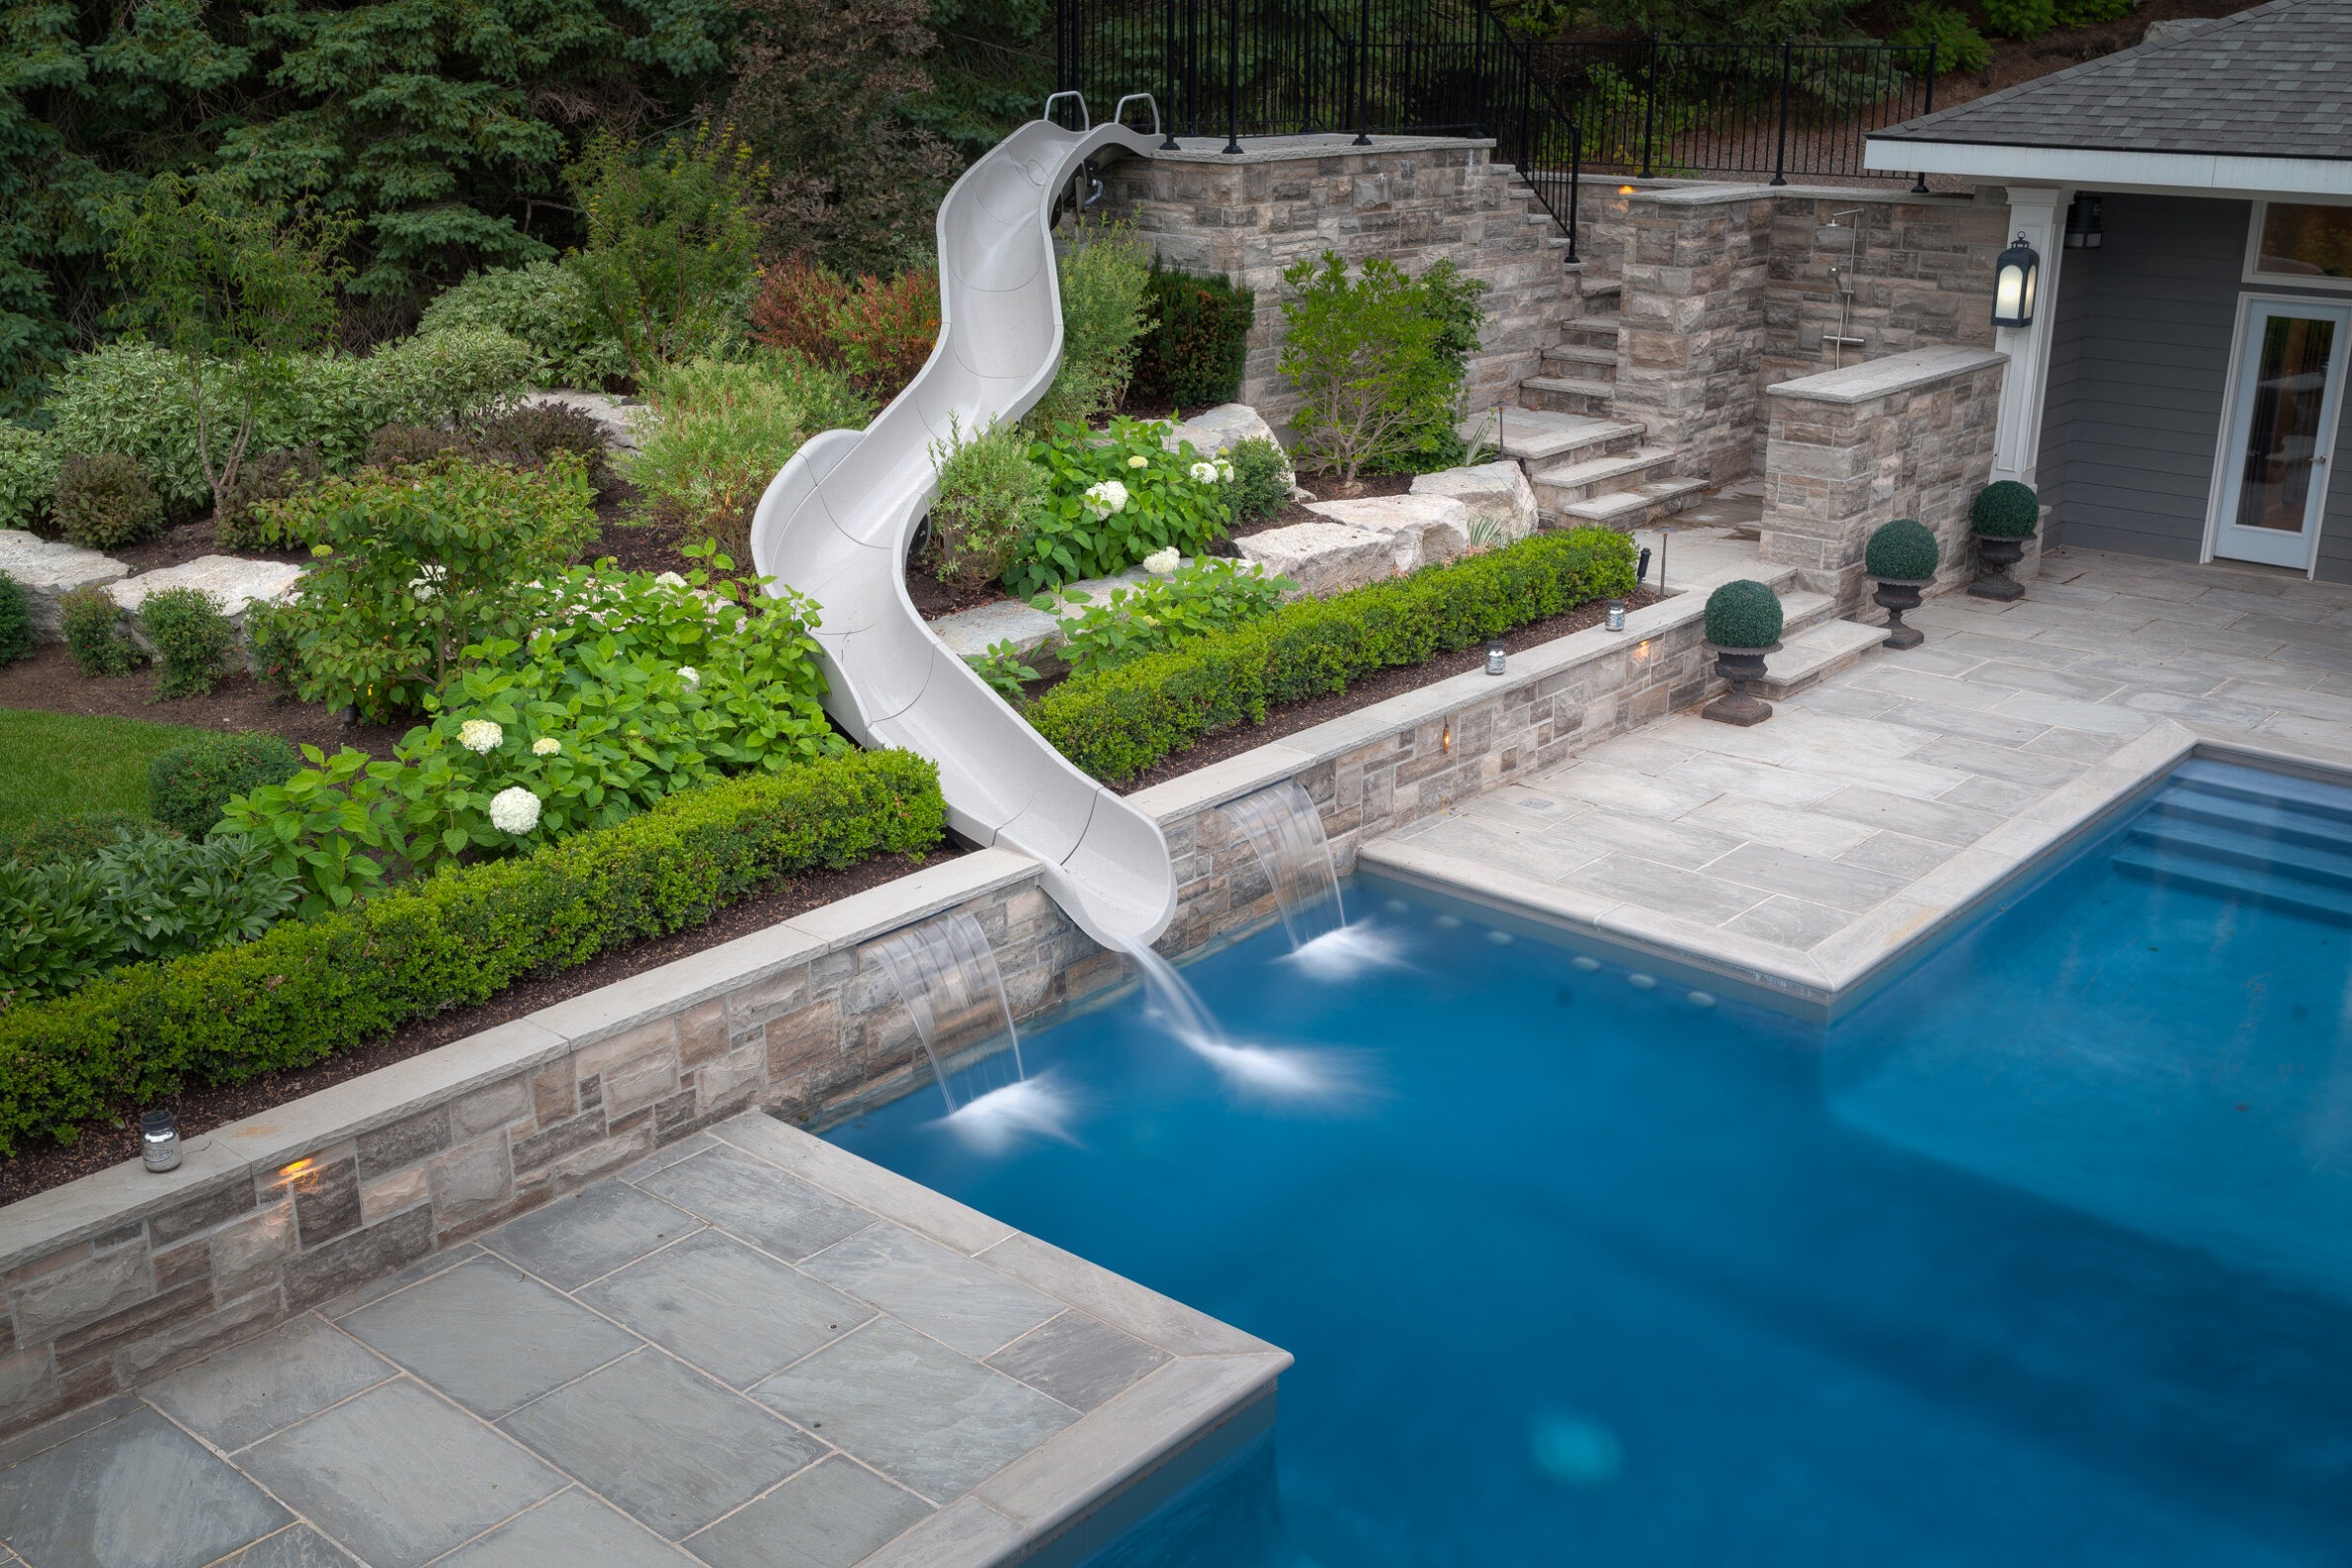 An outdoor residential swimming pool with a curved slide, landscaped garden, stone steps, and a house with exterior lighting visible in the background.